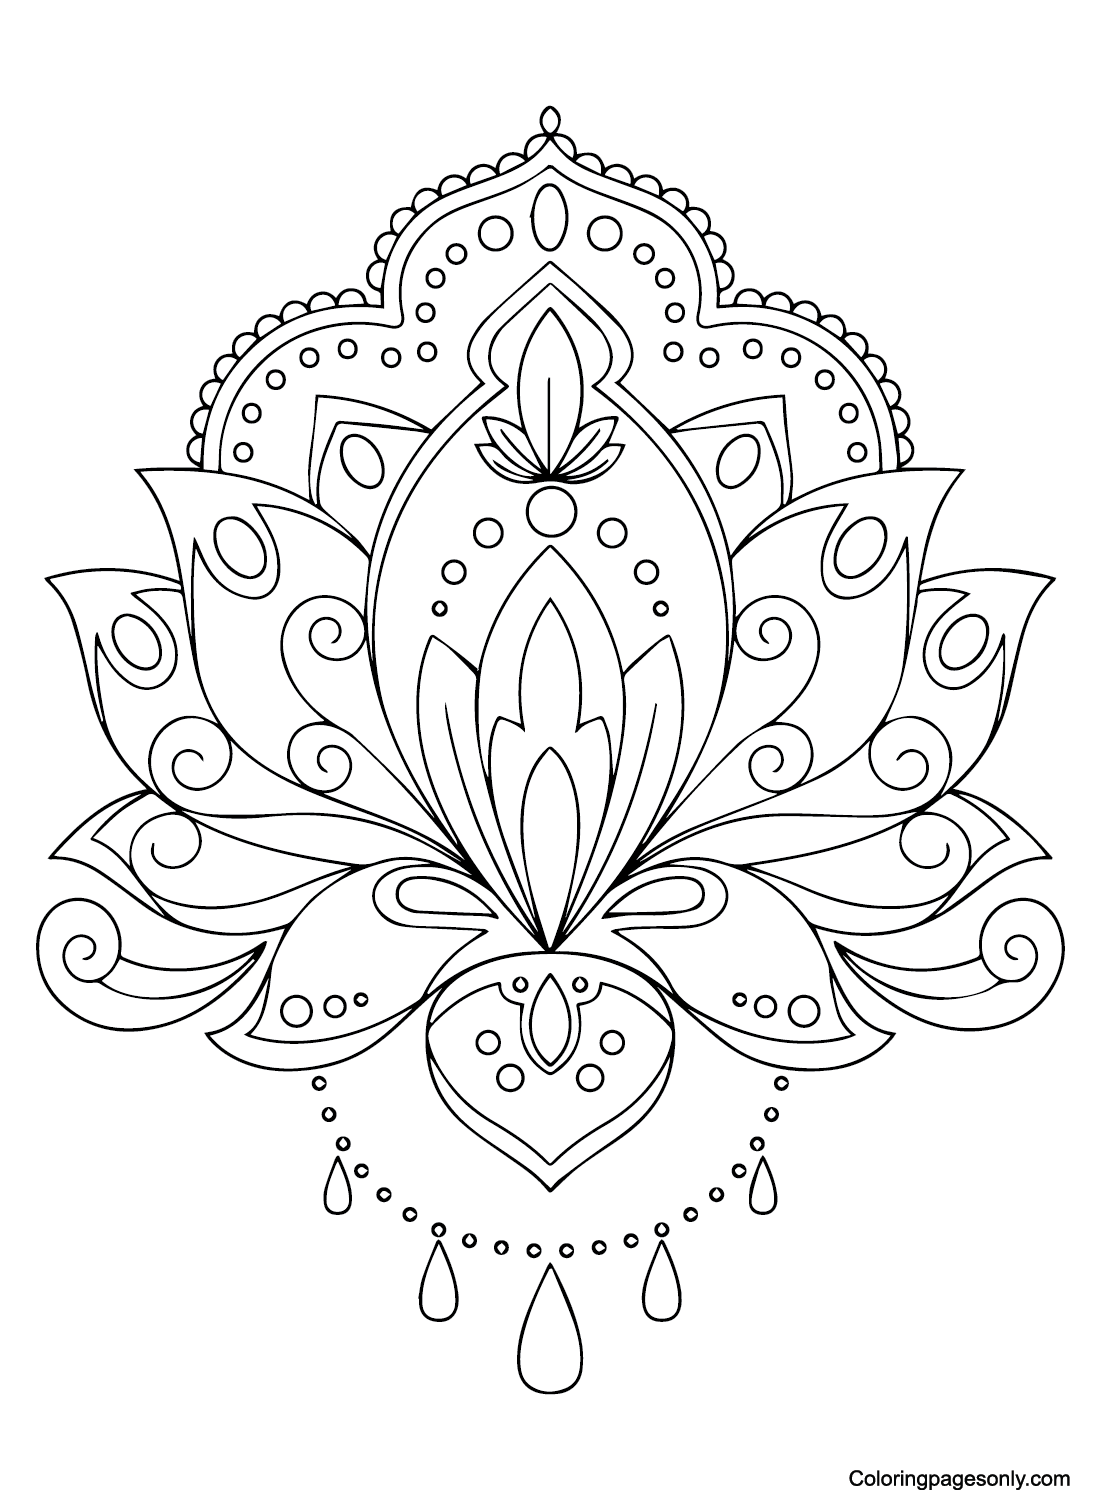 Mindfulness Pictures printable Coloring Pages